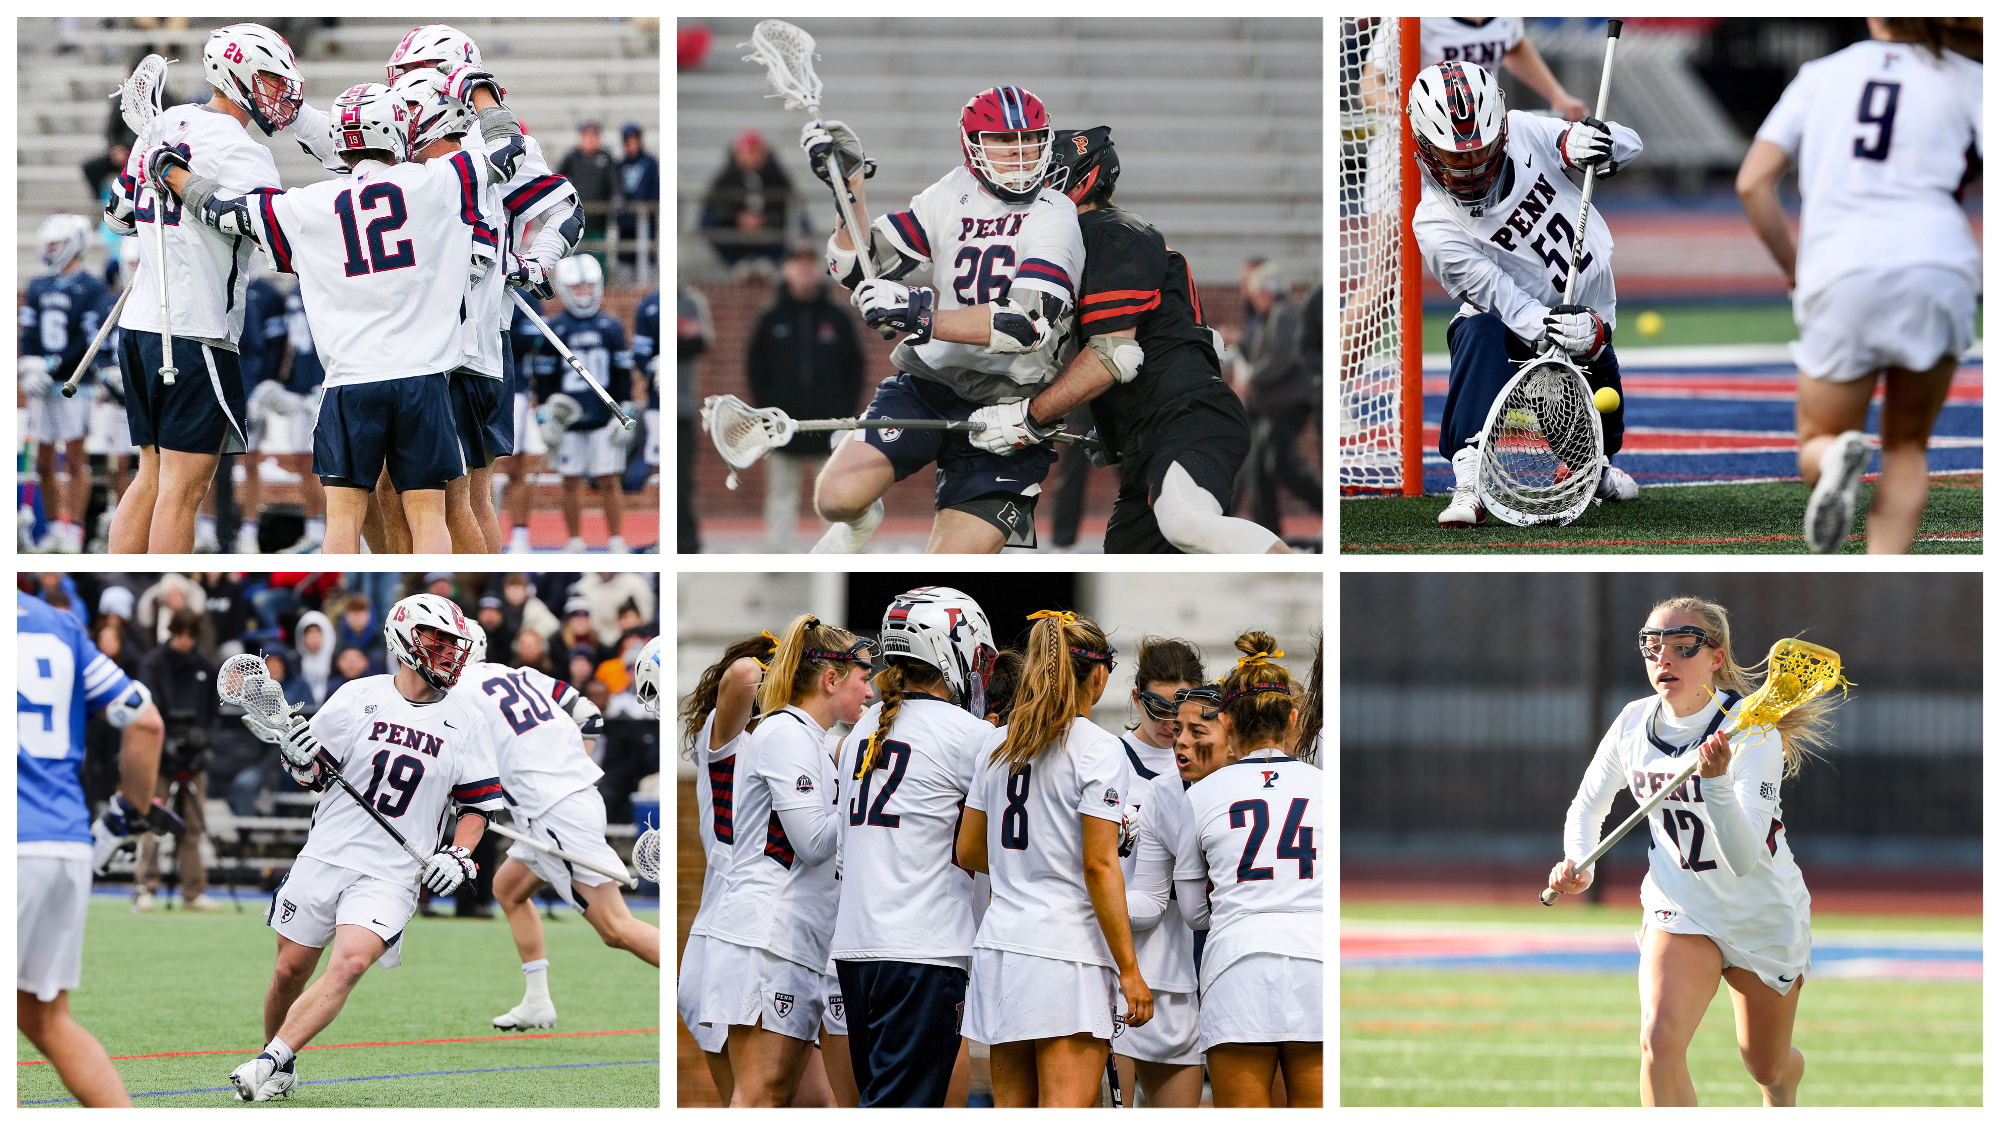 Six action shots of men's and women's lacrosse players.